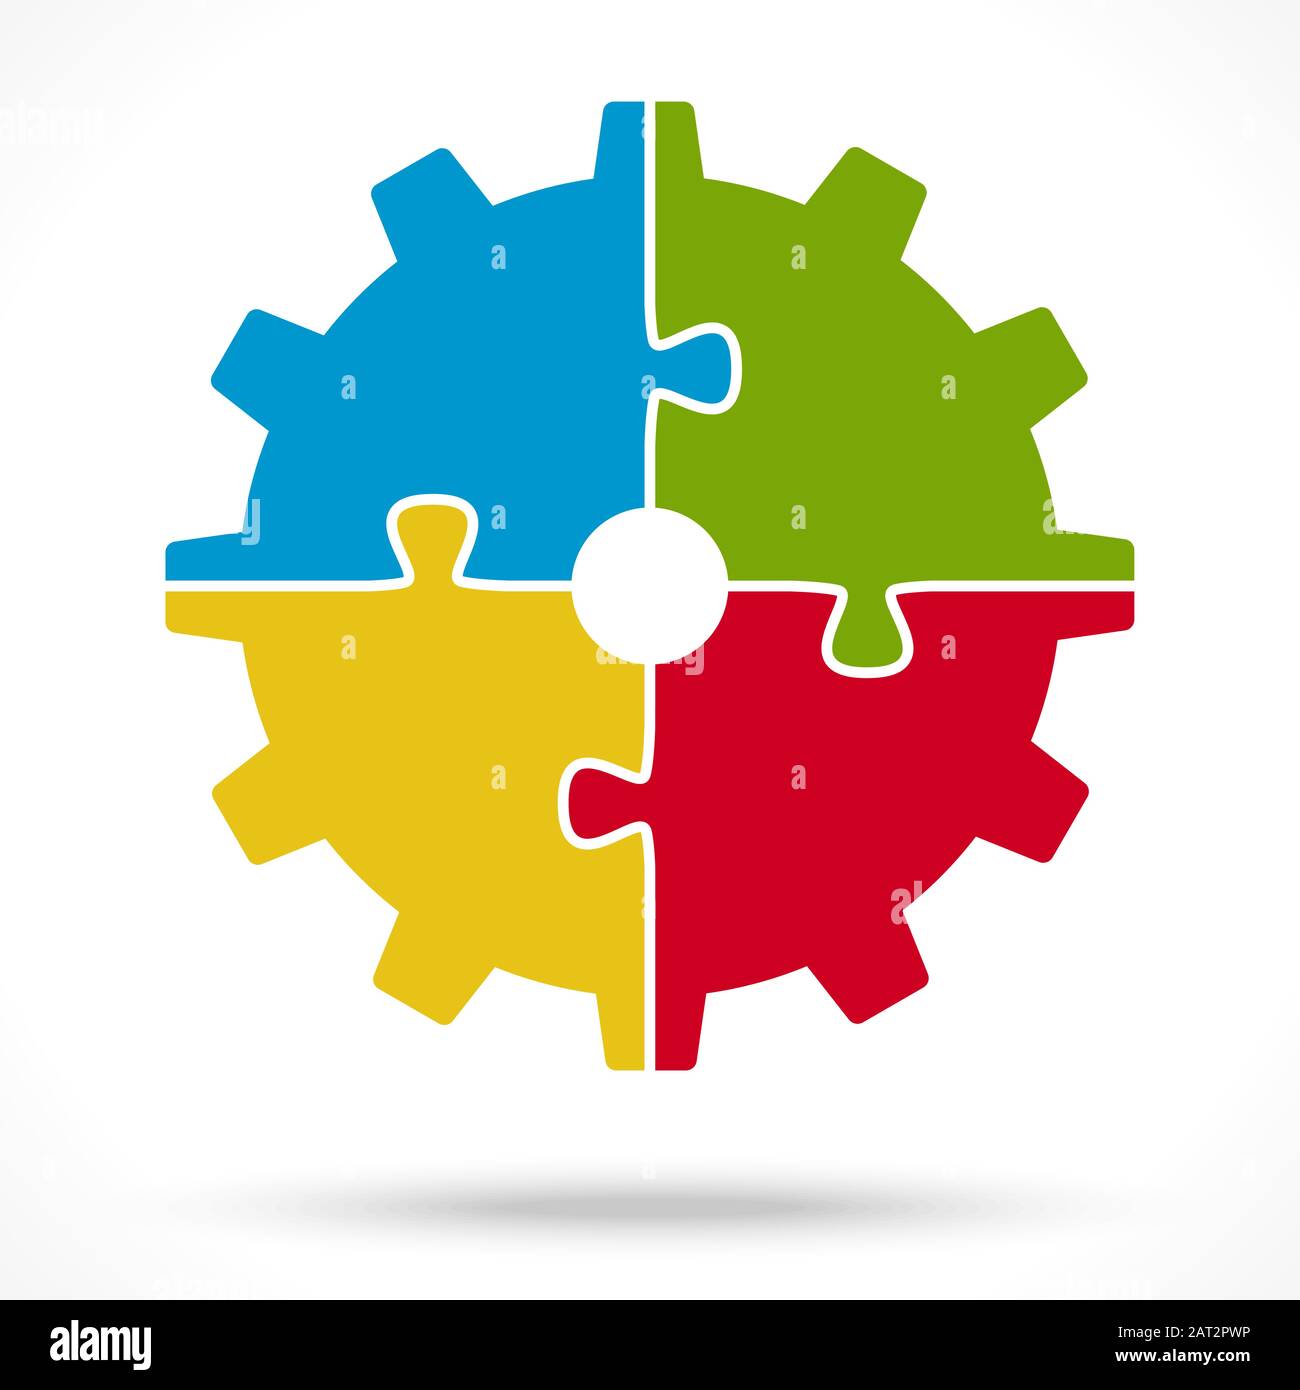 gear wheel with four colored puzzle parts for cooperation or teamwork symbolism Stock Vector